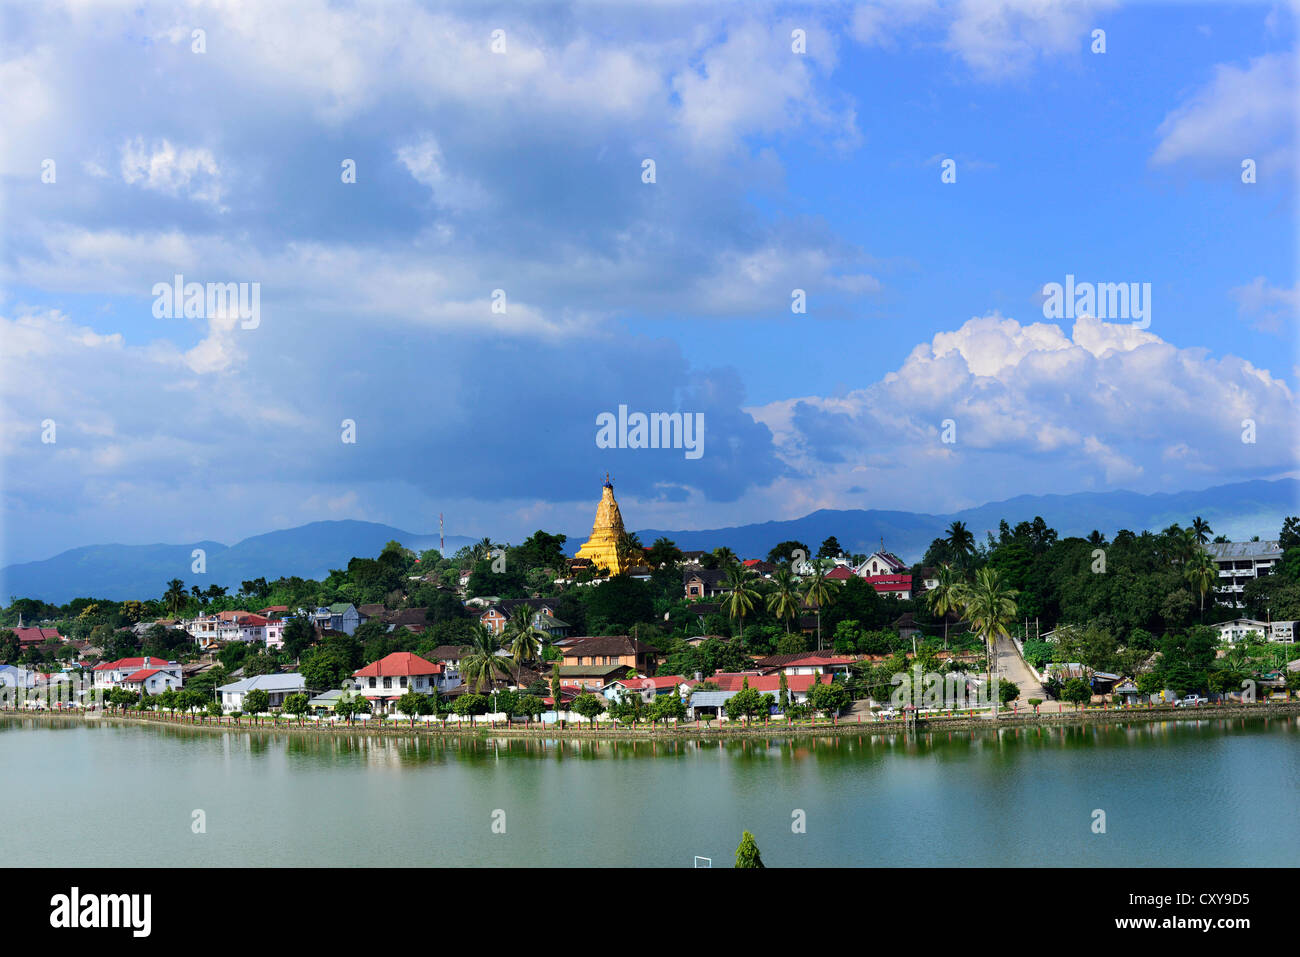 The peaceful town of Kengtung in eastern Shan state in Myanmar. Stock Photo